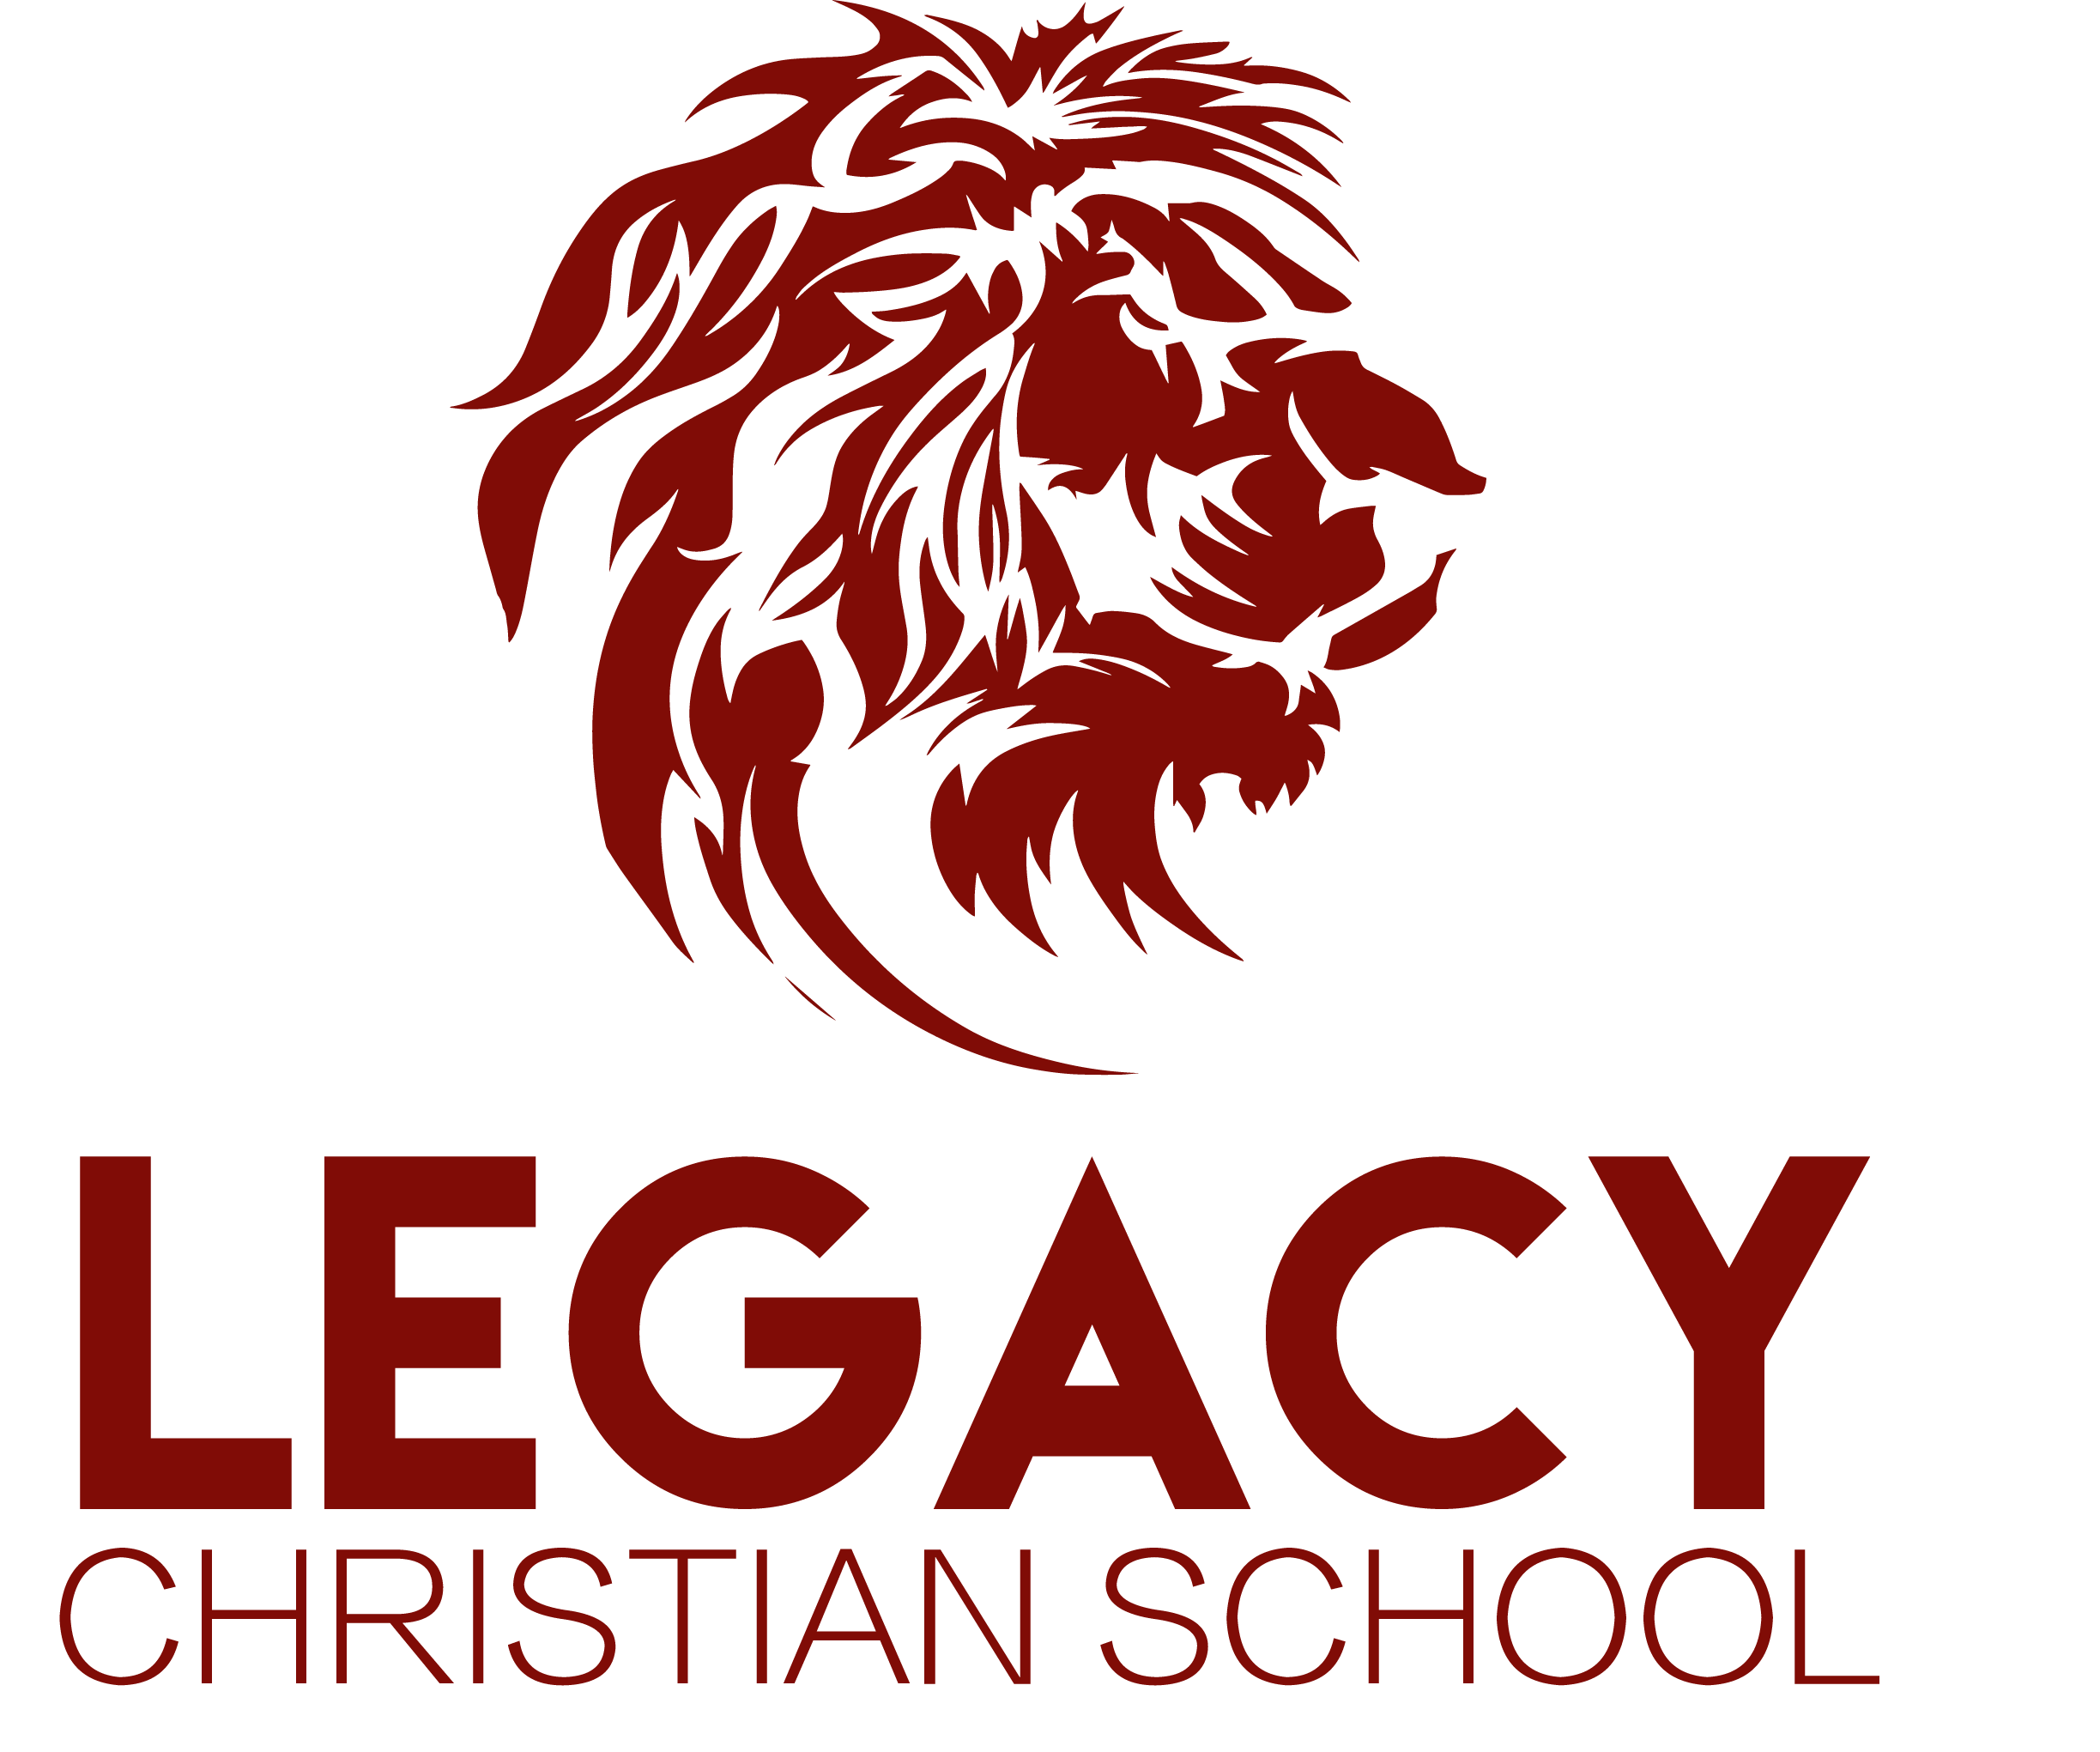 Legacy Christian School matching gifts and volunteer grants page